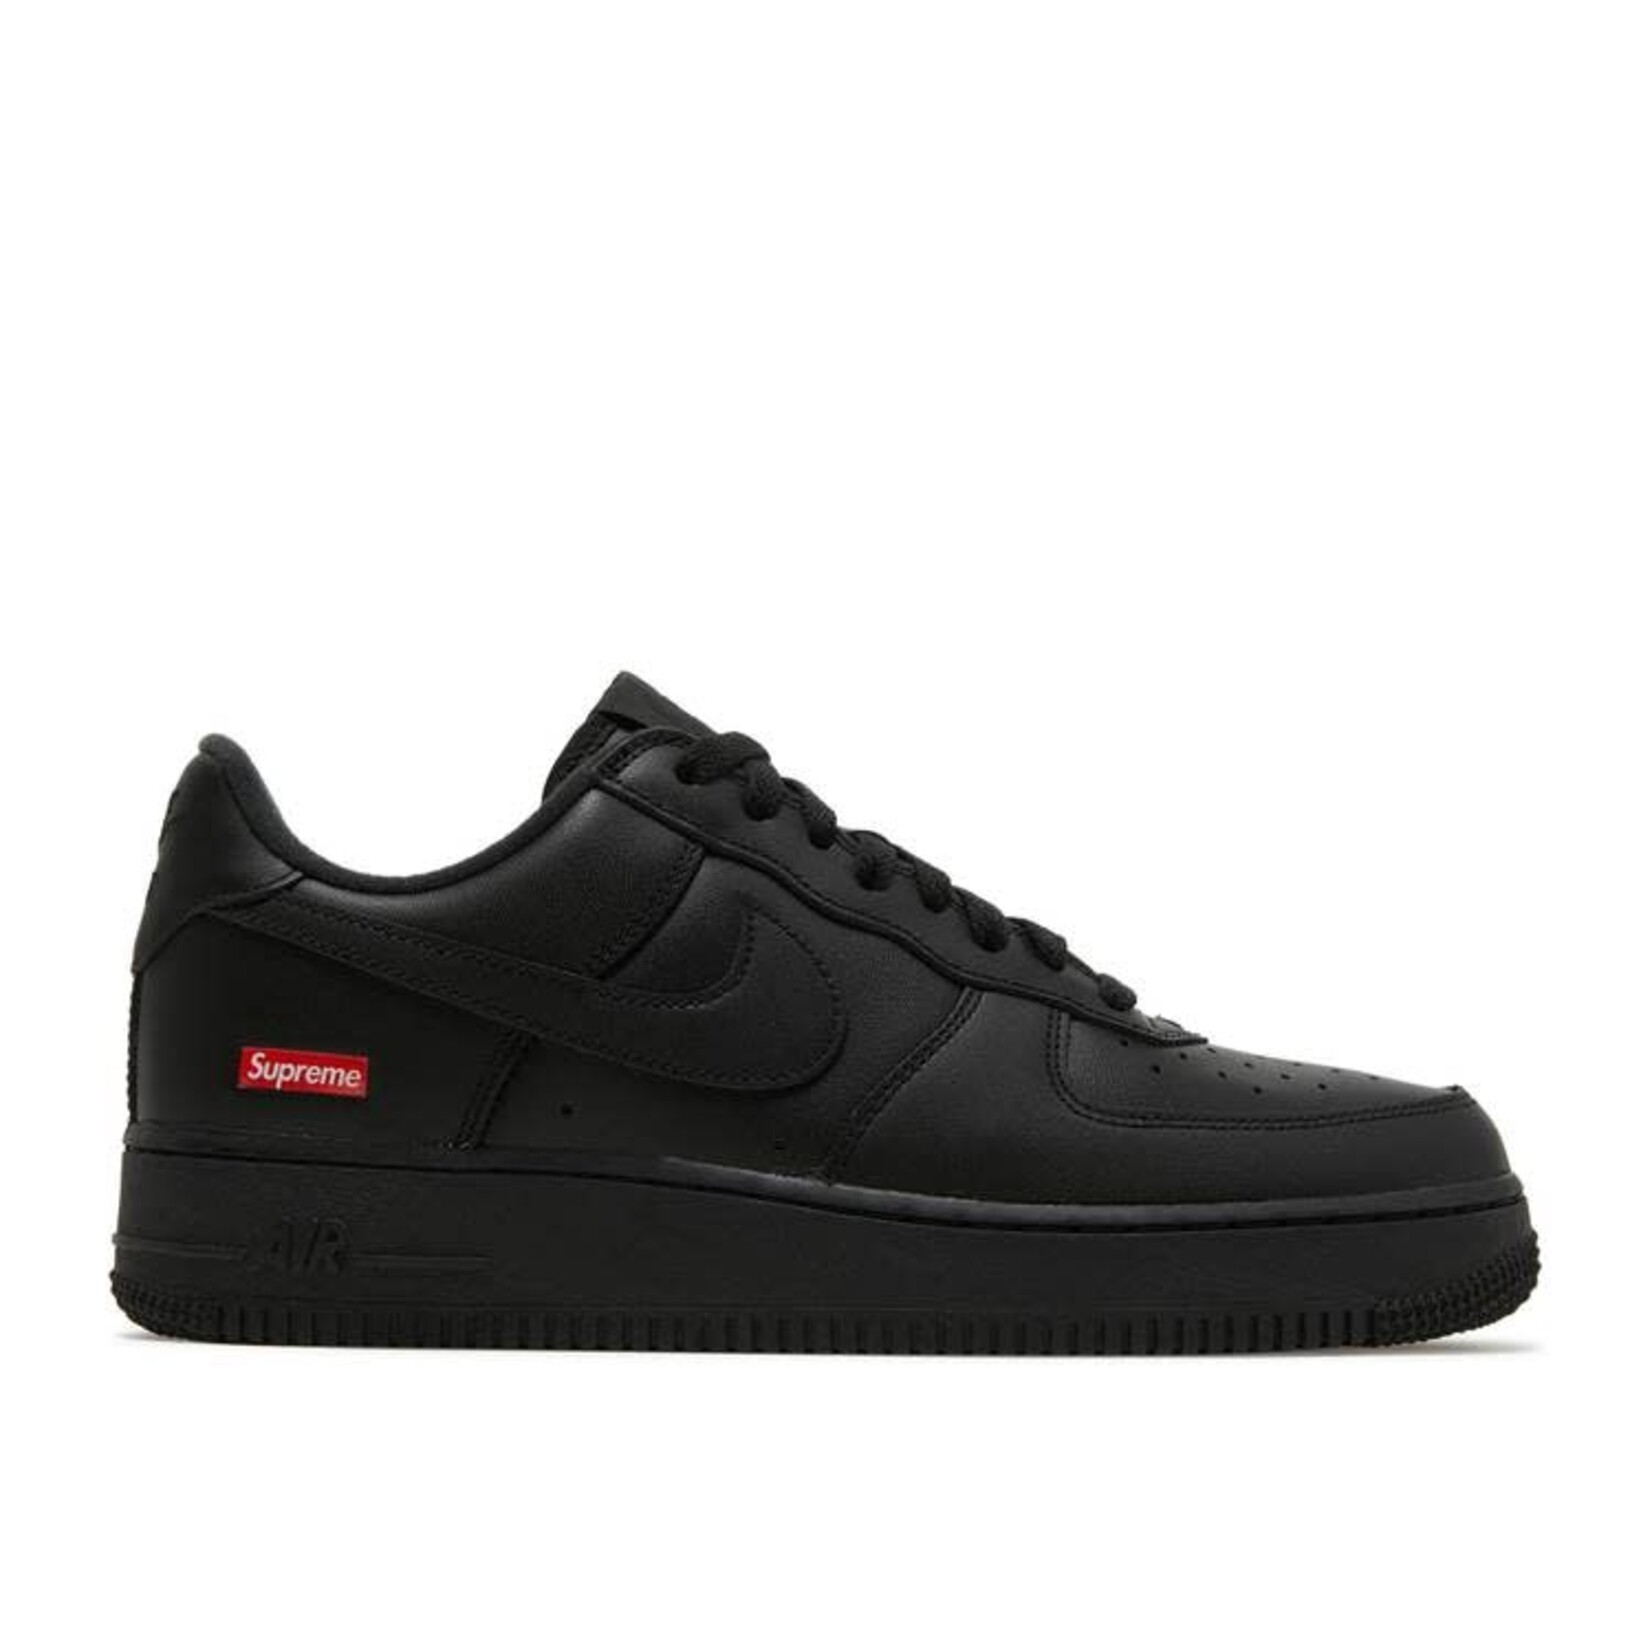 Nike Nike Air Force 1 Low Supreme Black Size 11.5, DS BRAND NEW